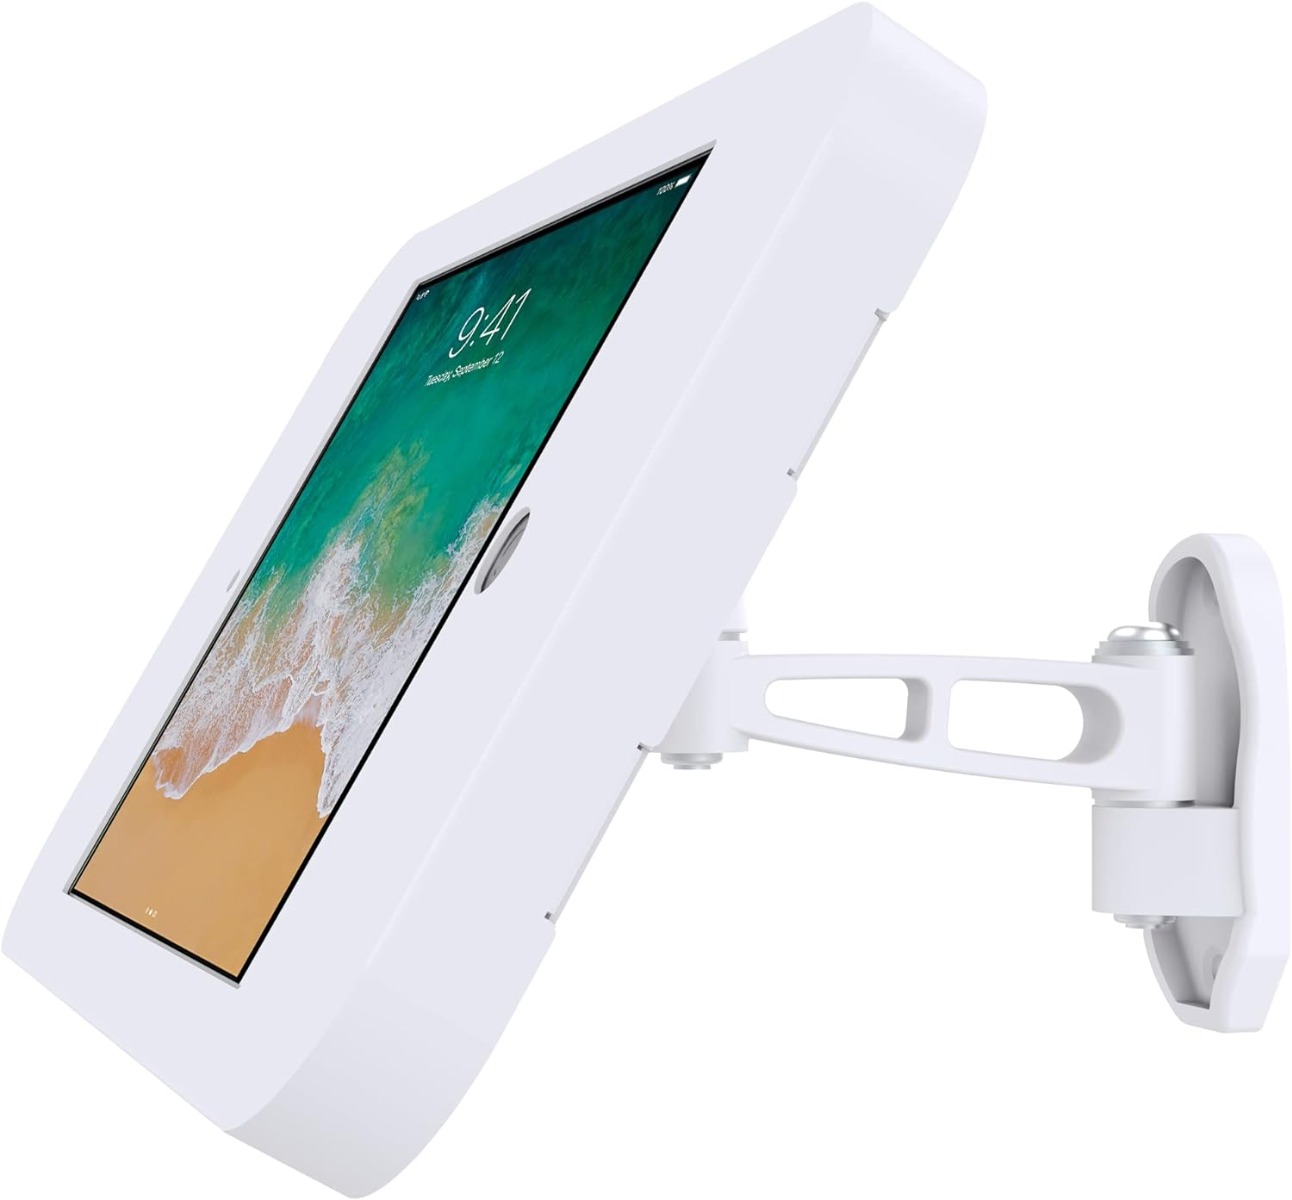 Kanto SWS200W Wall Mounted Anti-Theft Security Tablet Stand for 10.2" iPad - White